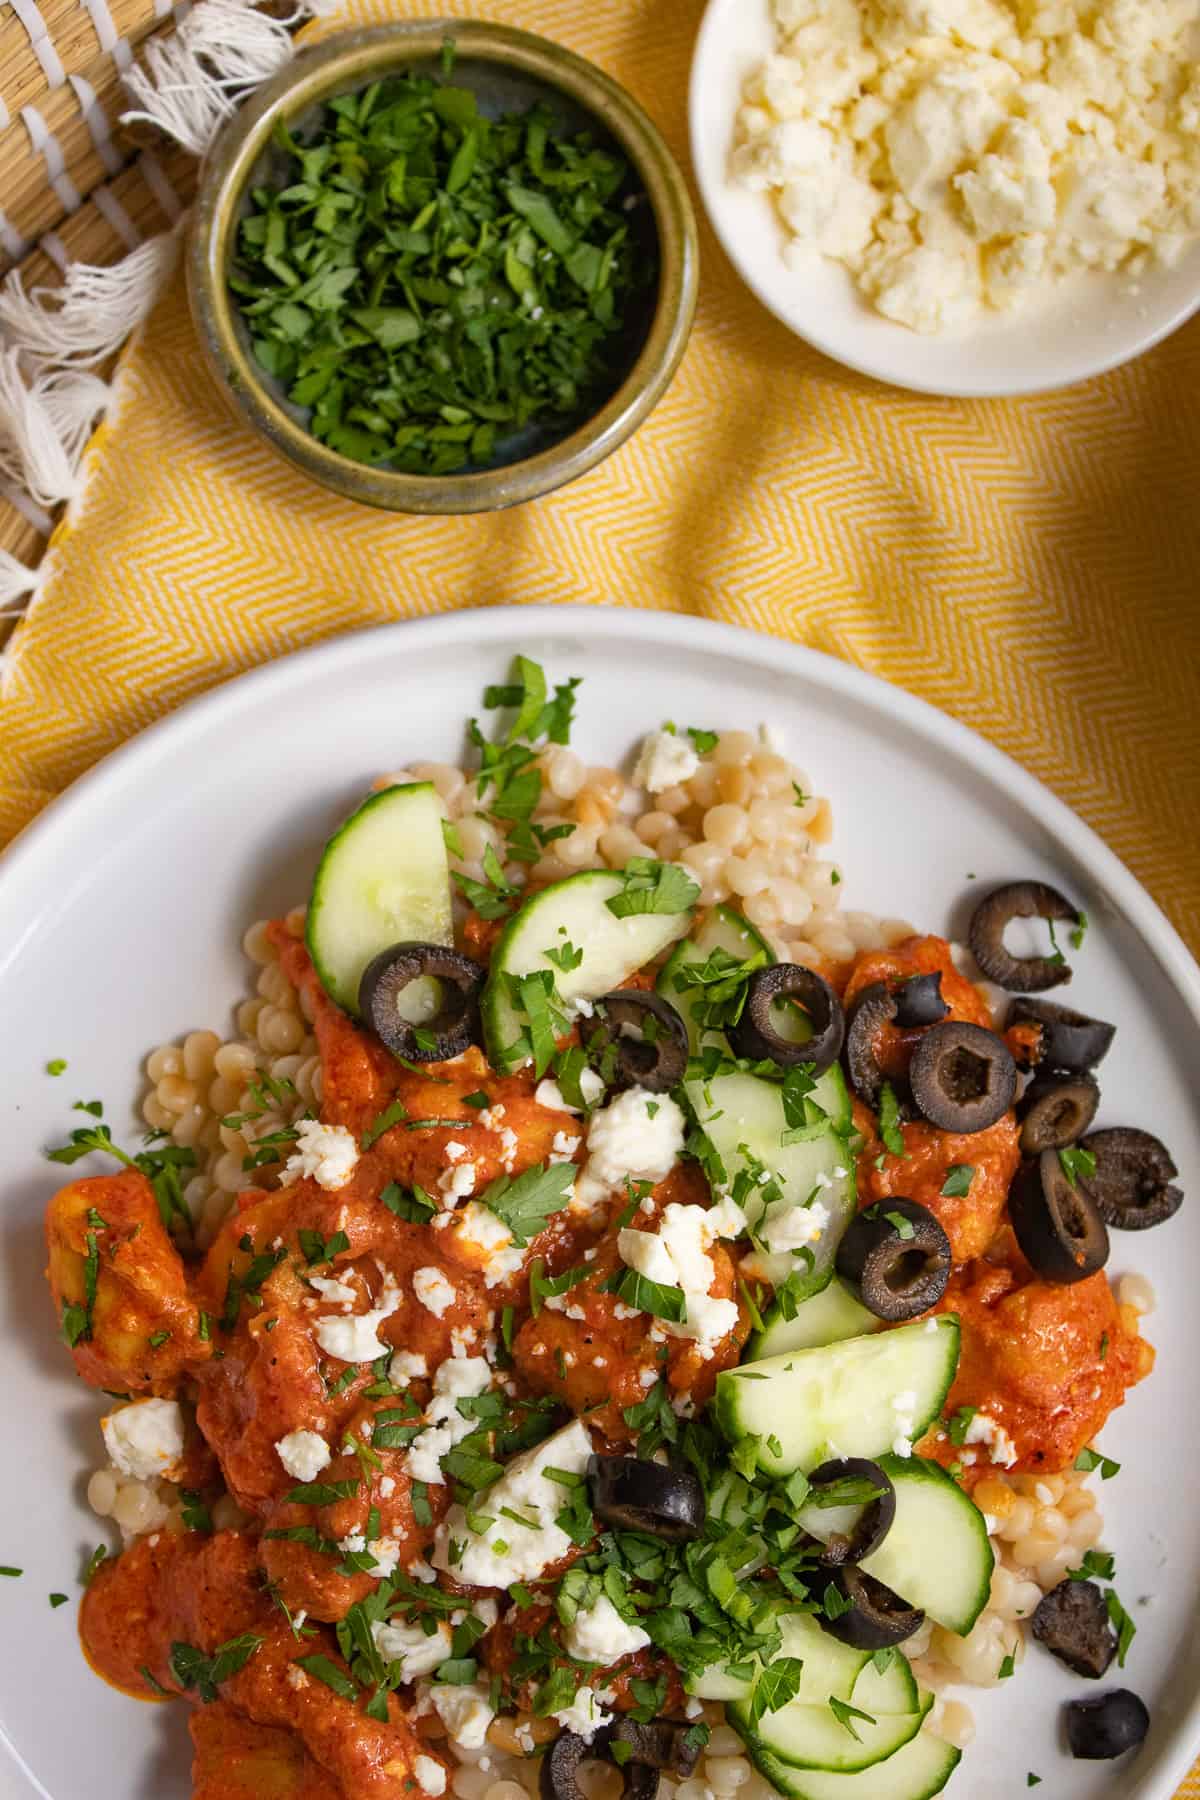 A white plate is piled with pearl cous cous, a vibrant orange sauce, and cucumber, feta cheese, parsley, and olive garnishes.